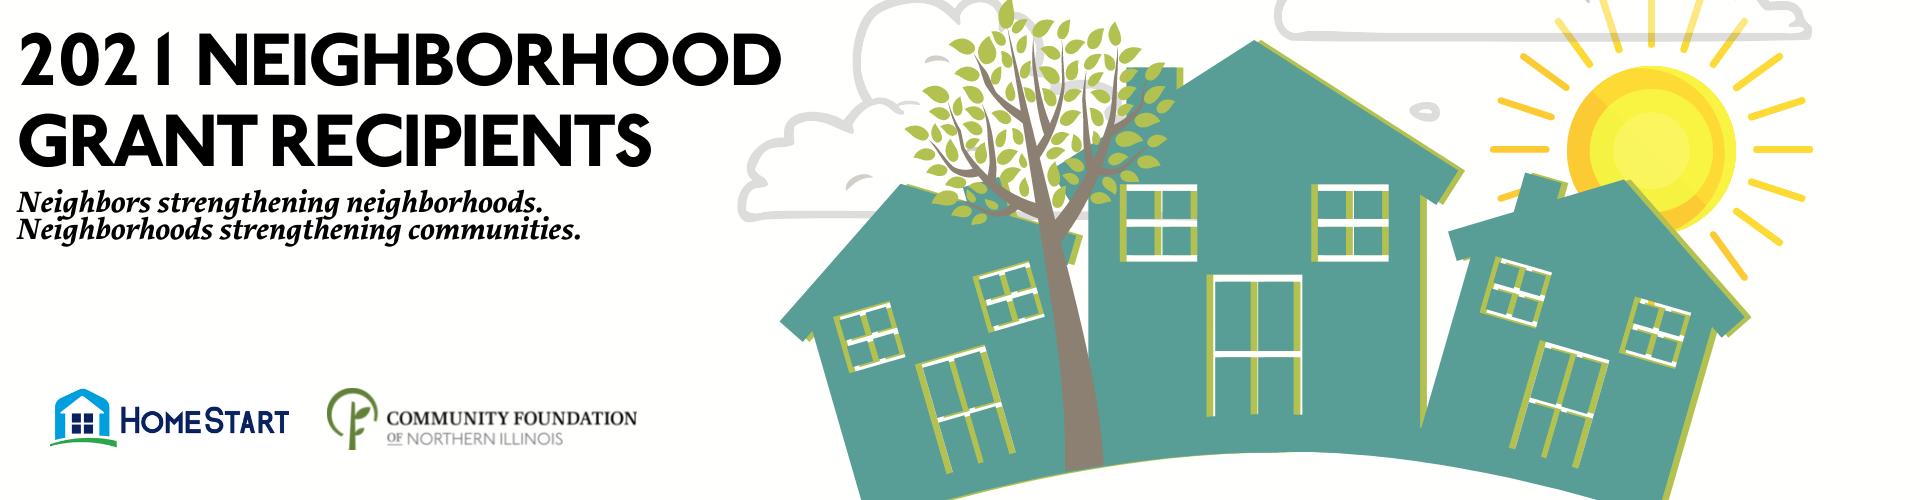 2021 Neighborhood Grant Recipients: Neighbors strengthening neighborhoods. Neighborhoods strengthening communities. Image of three houses with a tree, clouds, and sunshine. 